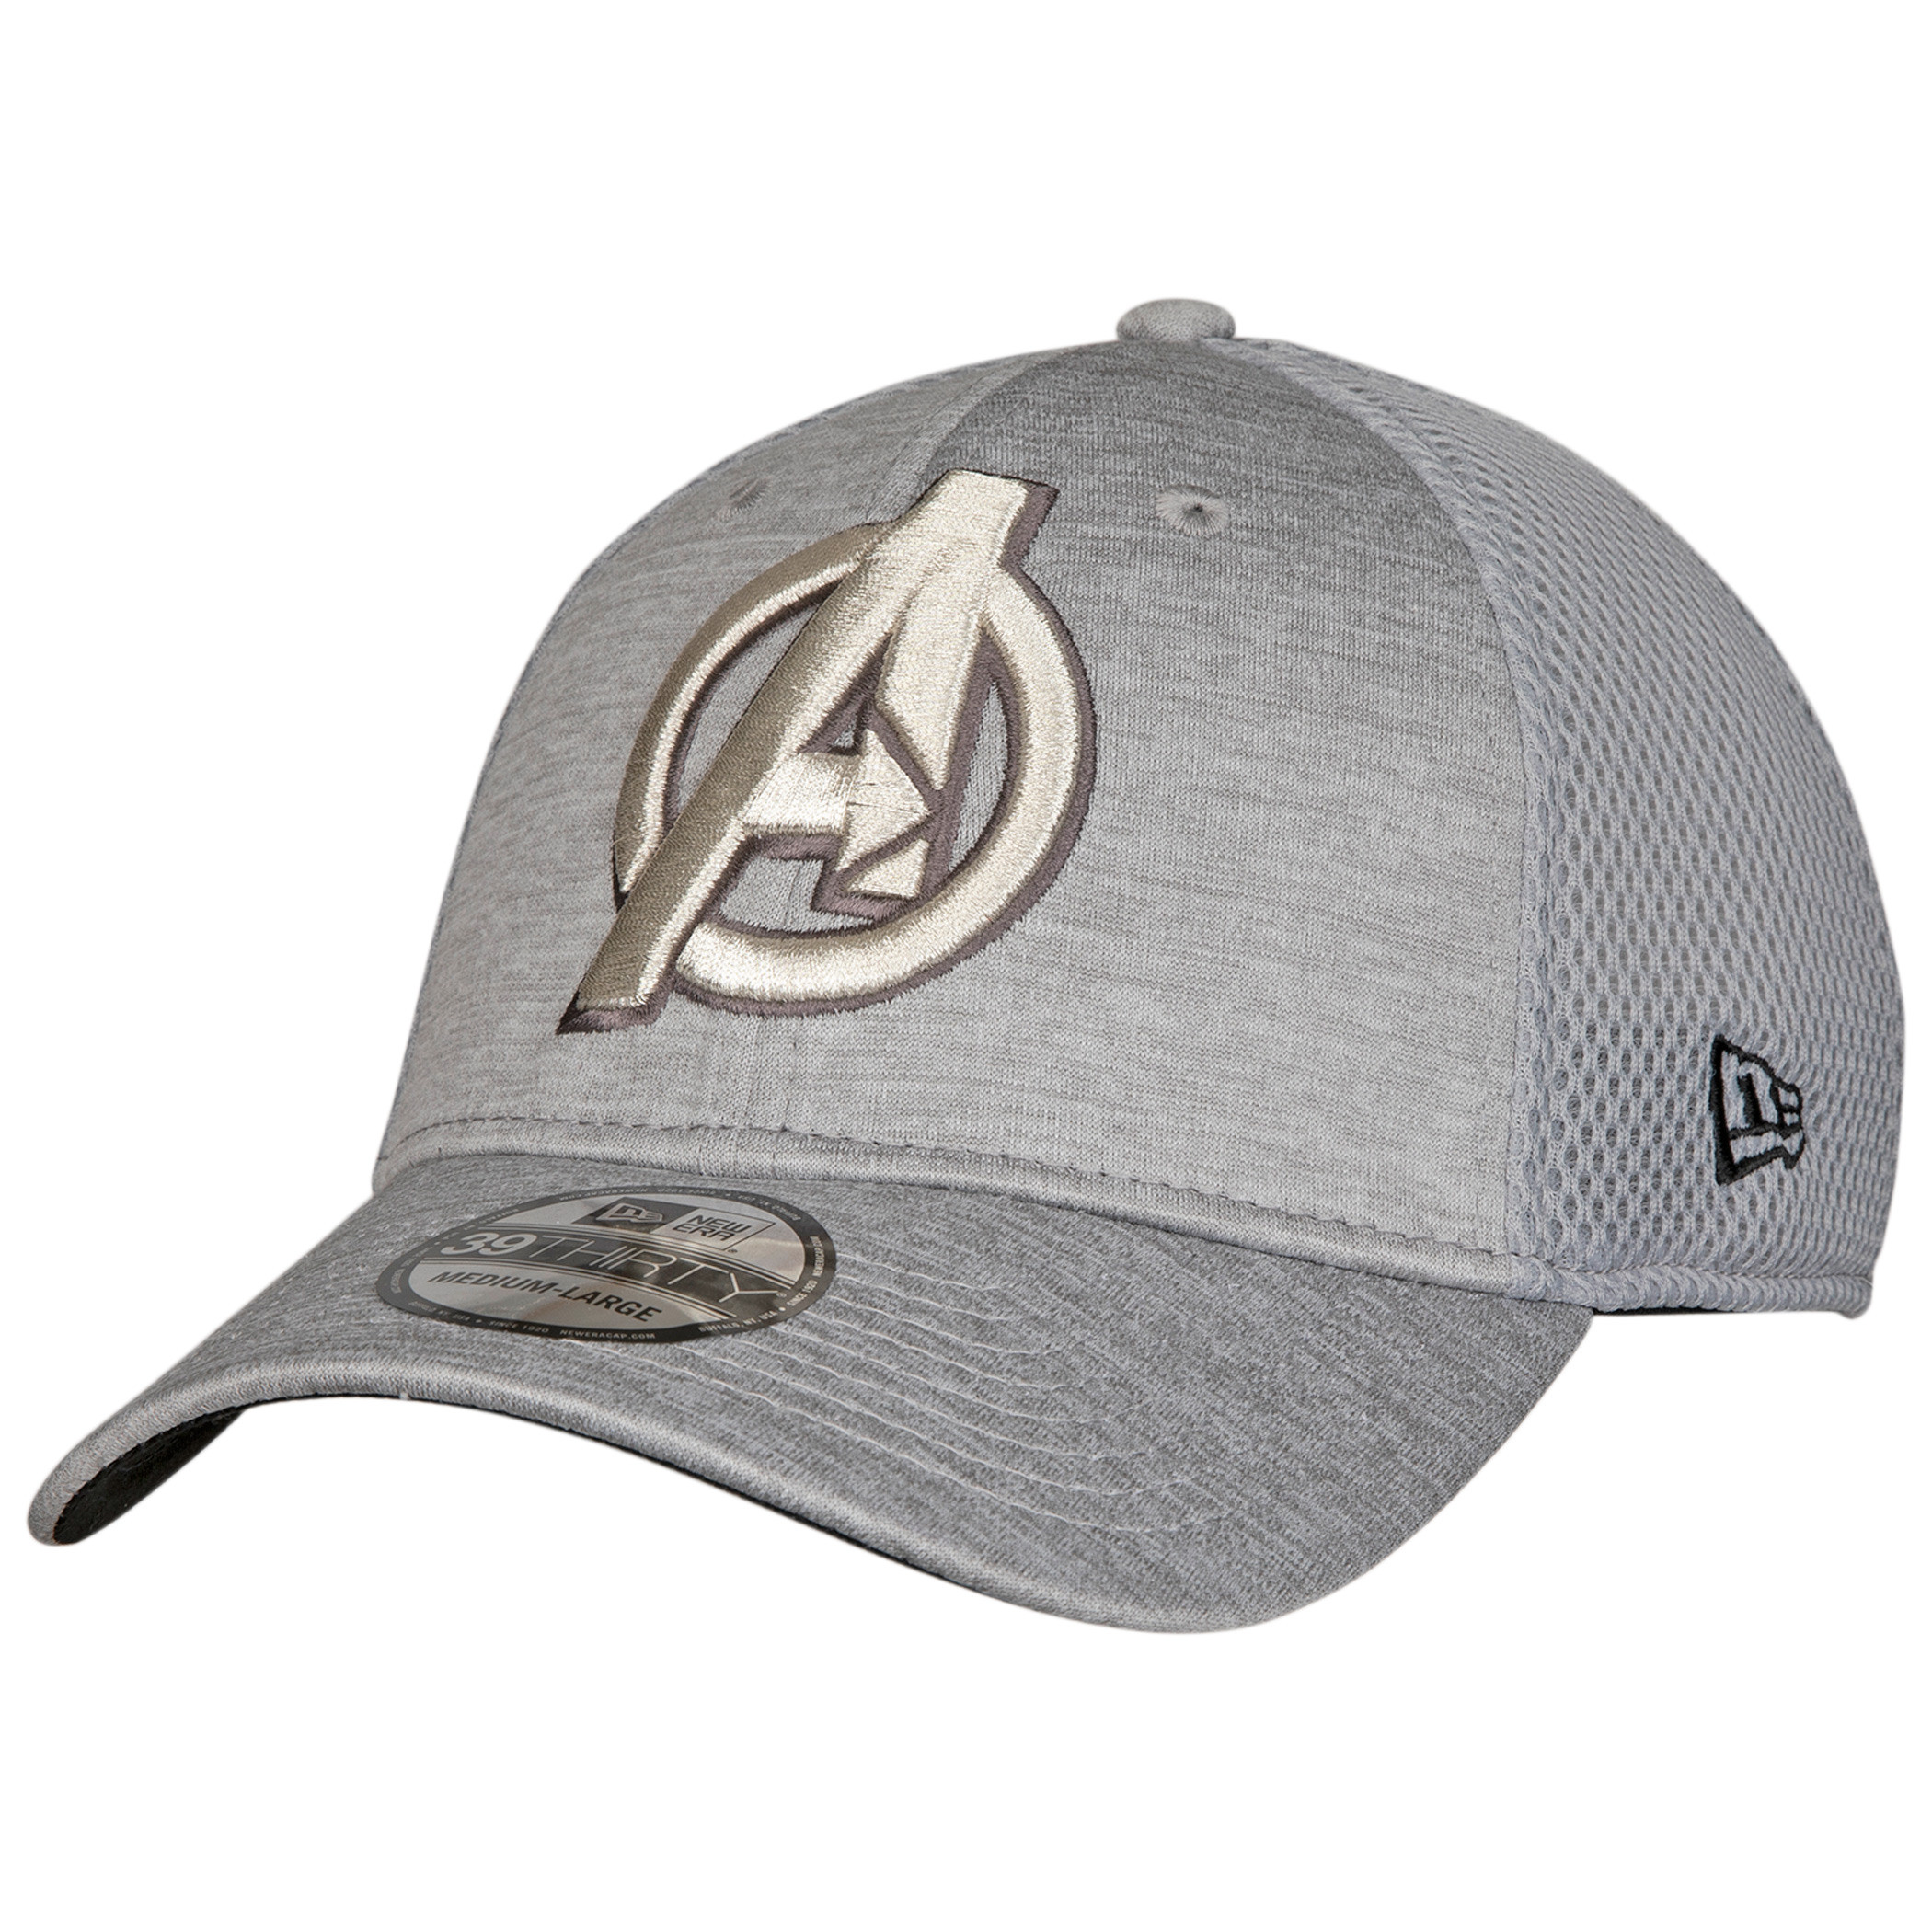 Avengers A Symbol Grey Shadow Tech New Era 39Thirty Fitted Hat